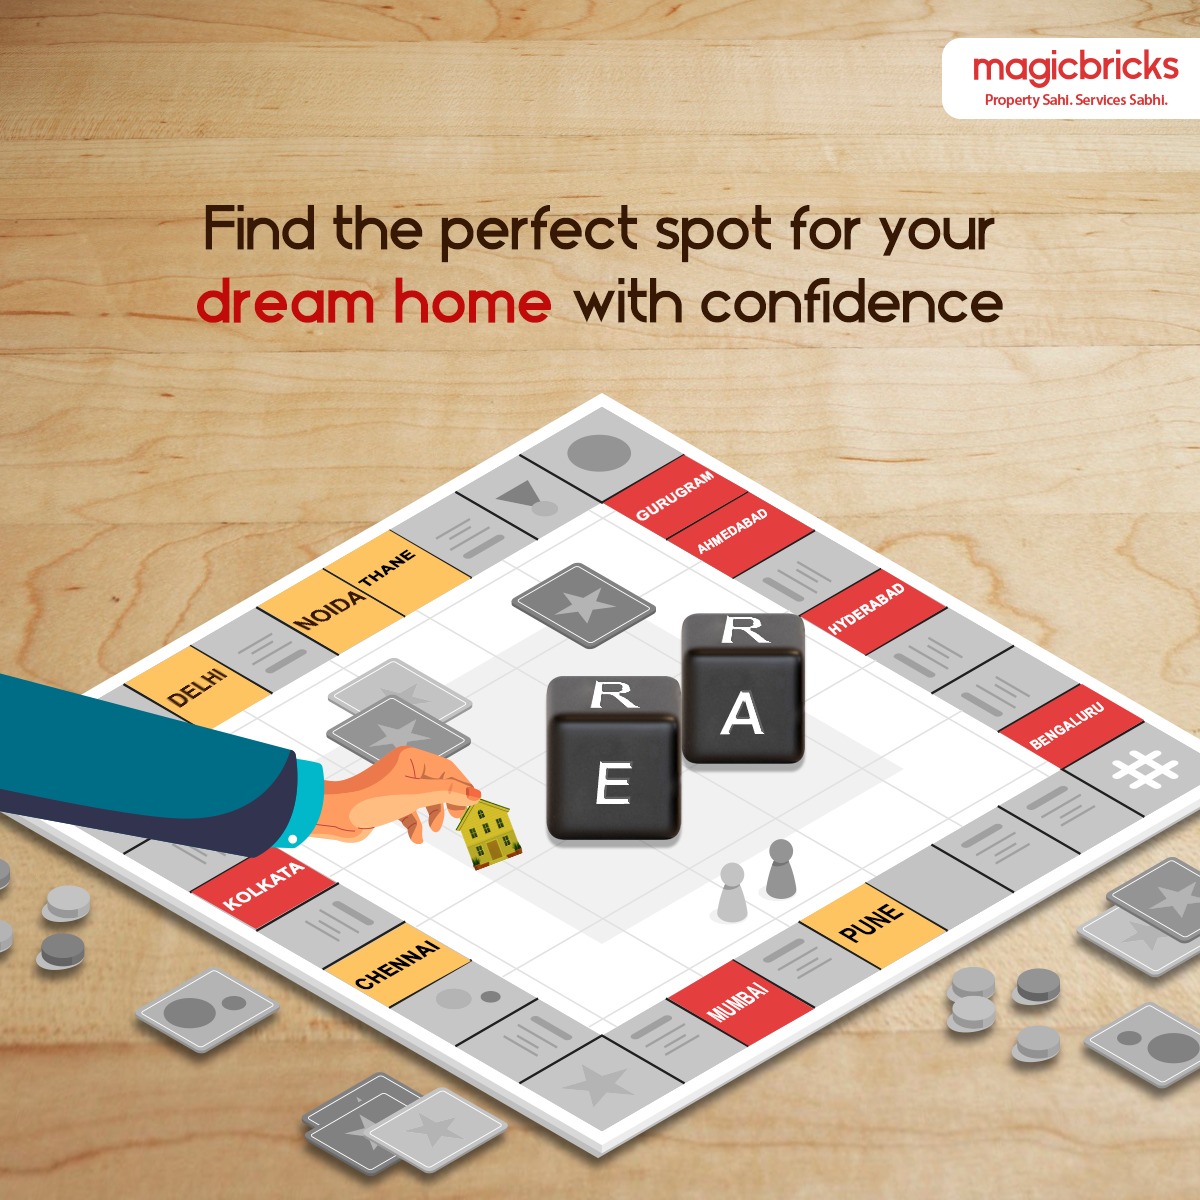 Pick your preferred city and find your dream home easily, with MagicHomes – your encyclopedia for ALL new projects in 13 cities. Get RERA information and much more to empower your home search: magicbricks.com/newprojects #Magicbricks #PropertySahiServicesSabhi #DreamHome